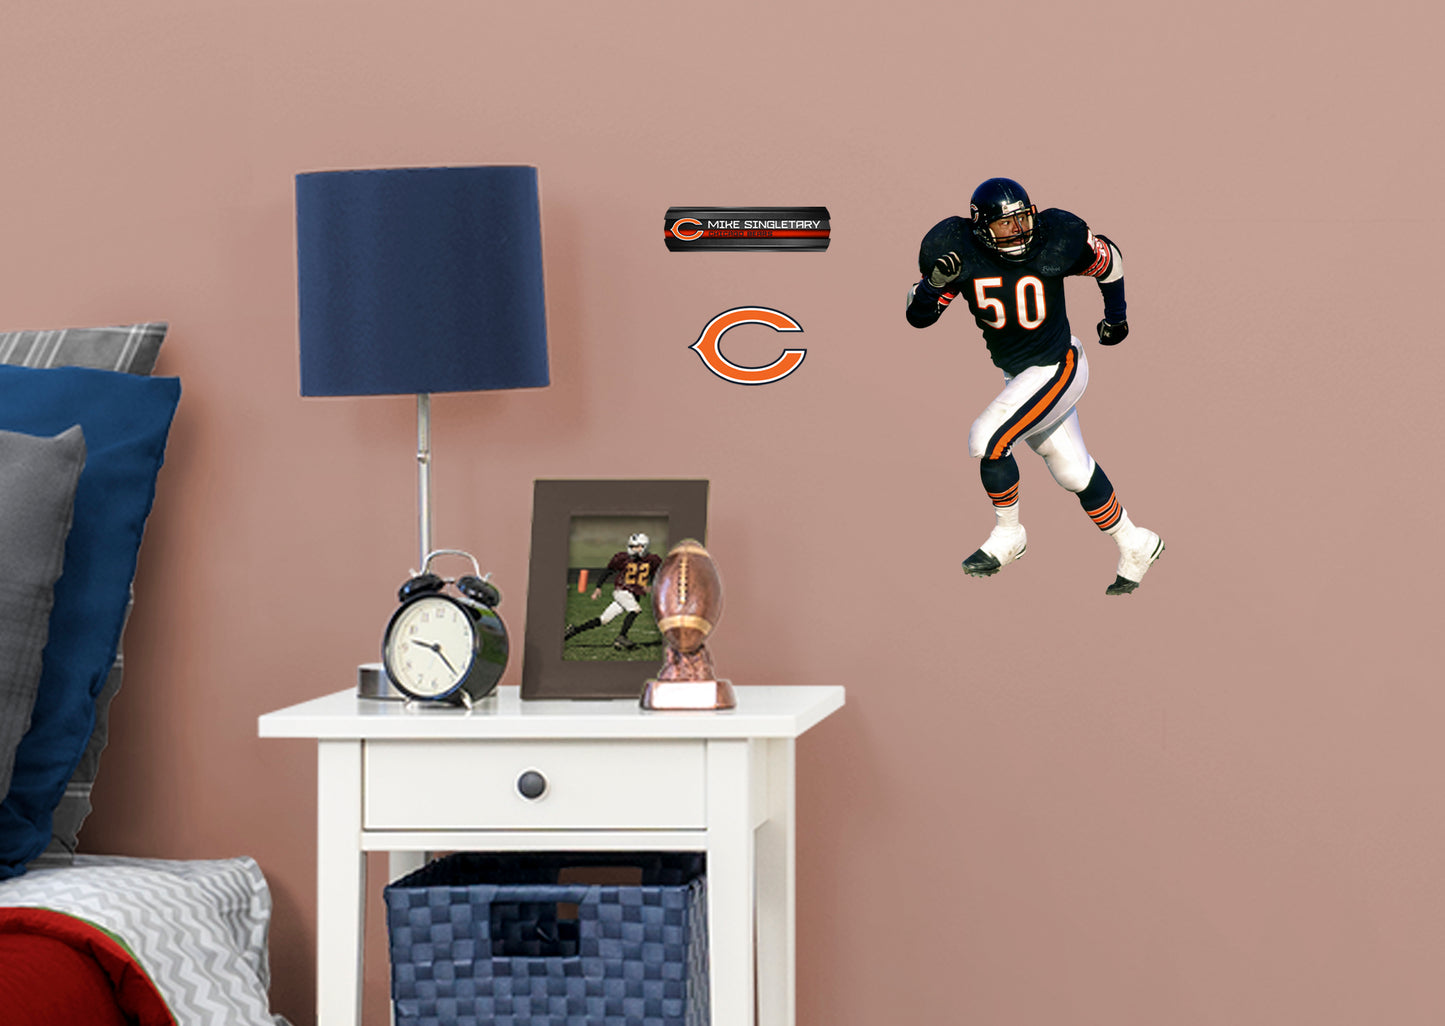 Chicago Bears: Mike Singletary  Legend        - Officially Licensed NFL Removable Wall   Adhesive Decal